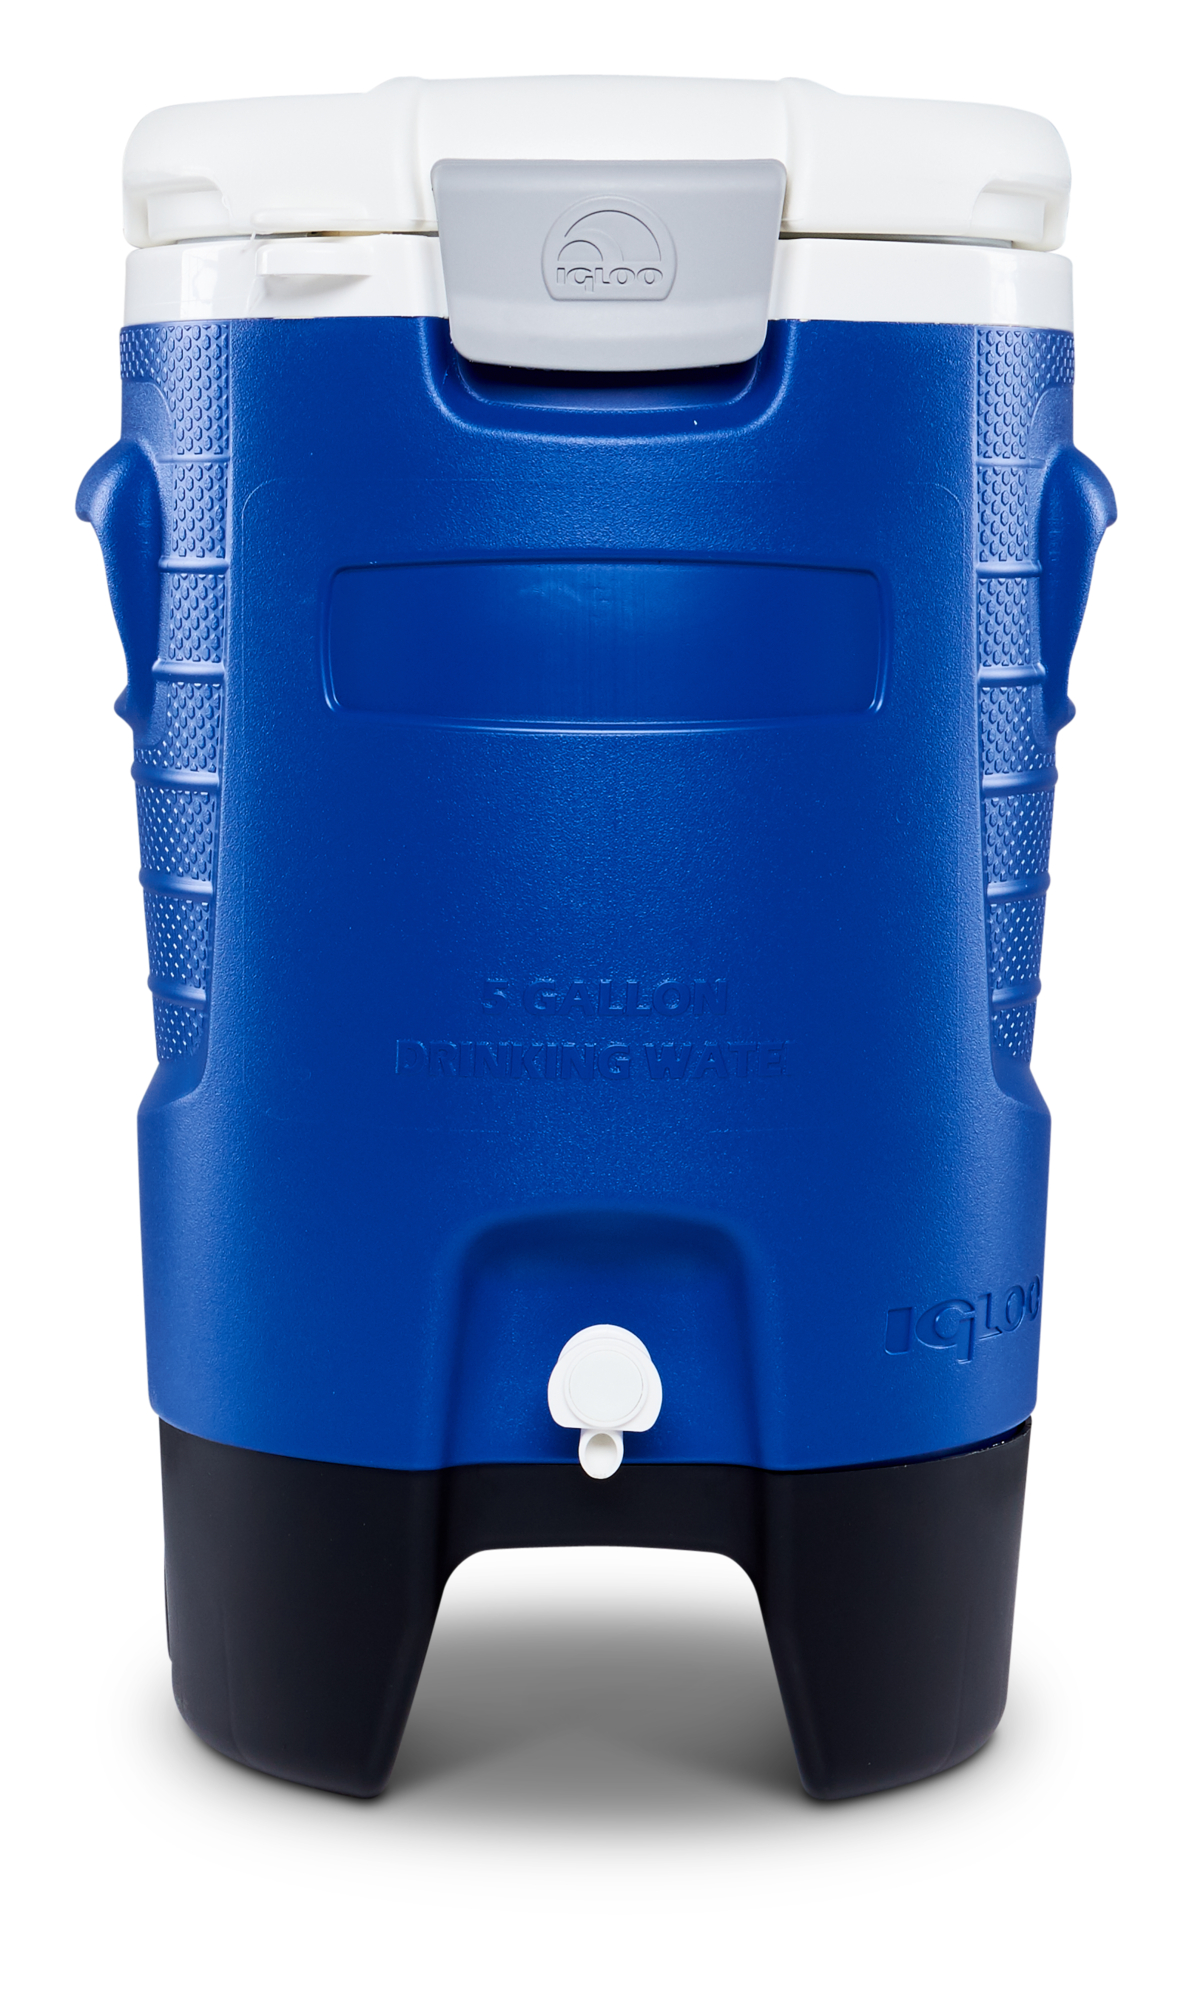 Igloo 5-Gallon Sports Rolling Water Cooler with Wheels - Blue - image 1 of 6